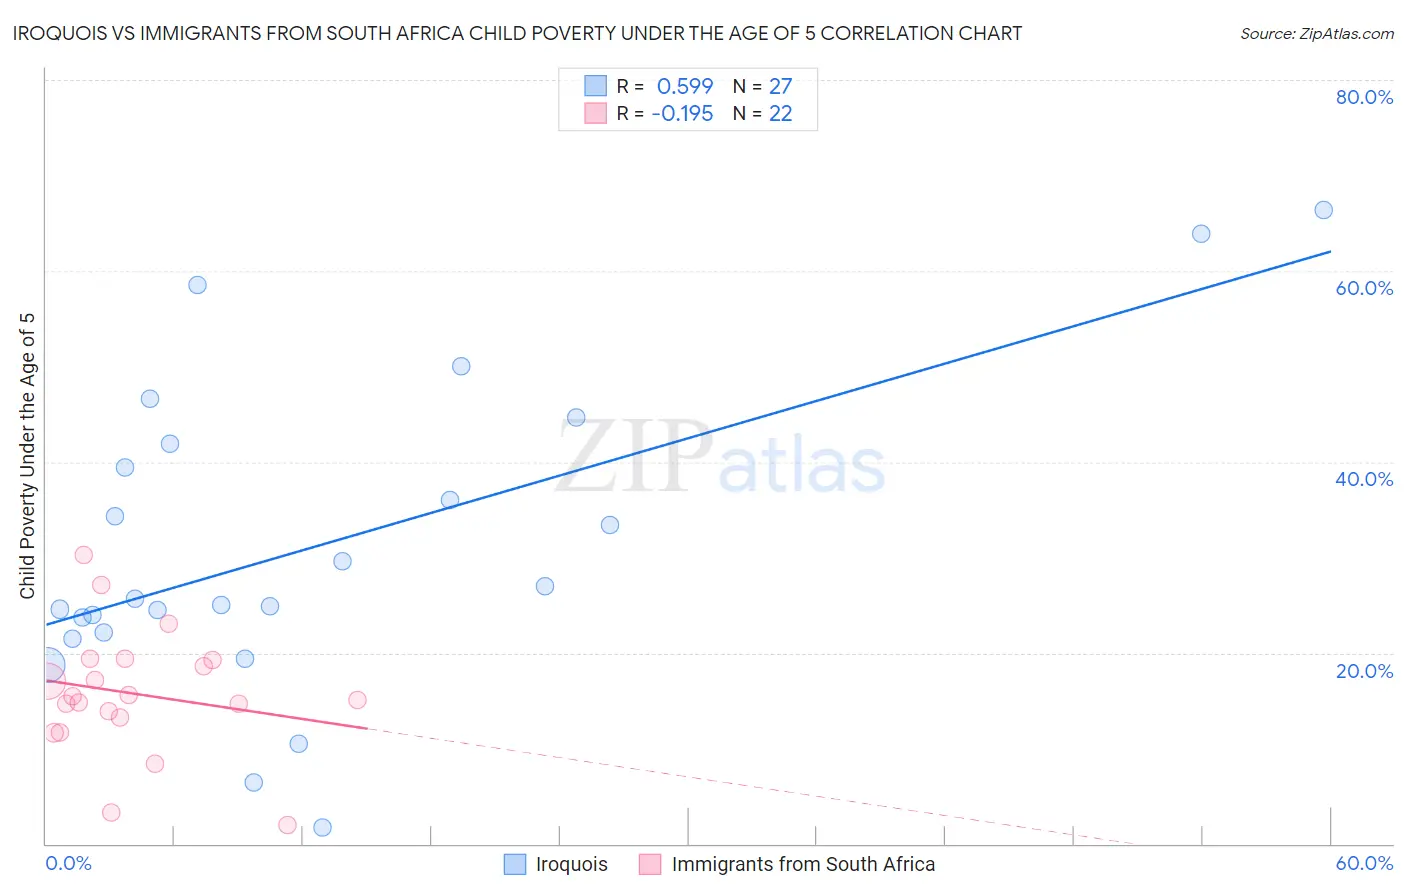 Iroquois vs Immigrants from South Africa Child Poverty Under the Age of 5